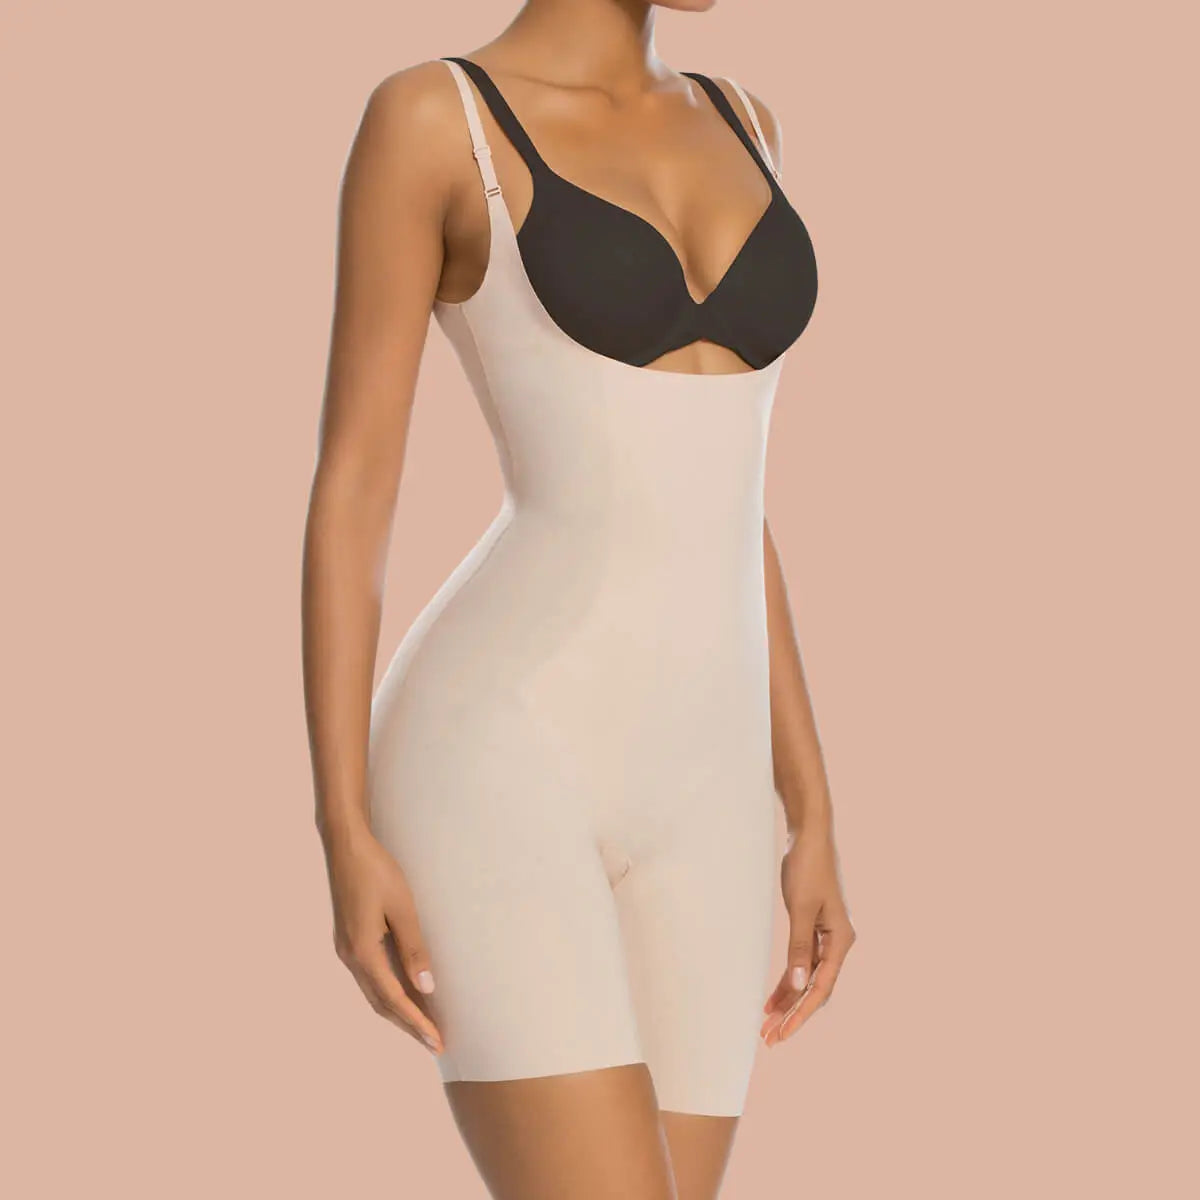 Shanar Industries Black,White and Beige Tummy Minimizer at Rs 250